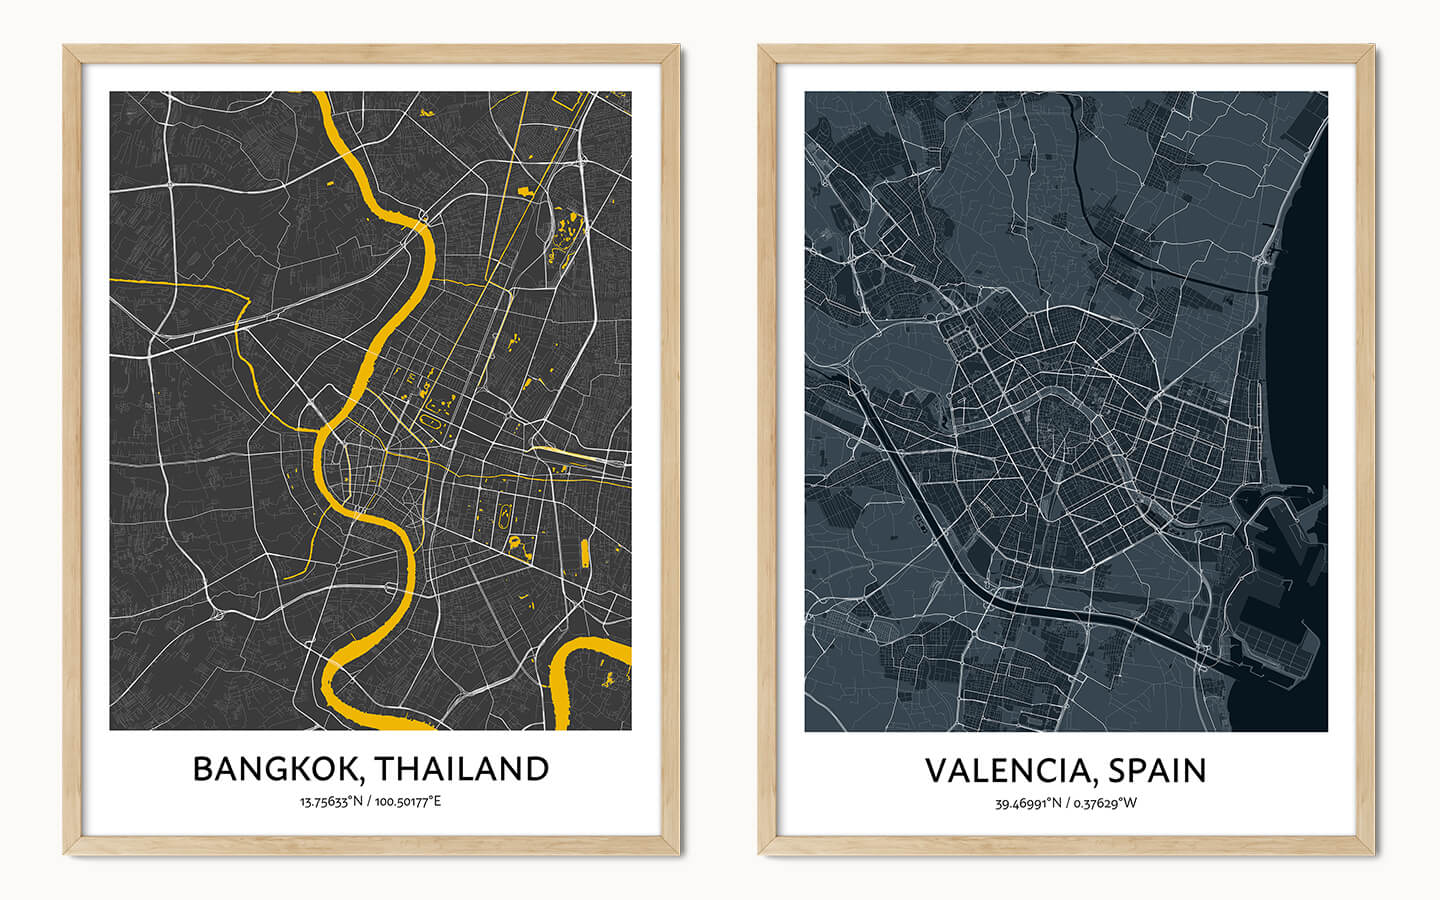 Bangkok and Valencia custom map gifts framed and hanged on the wall